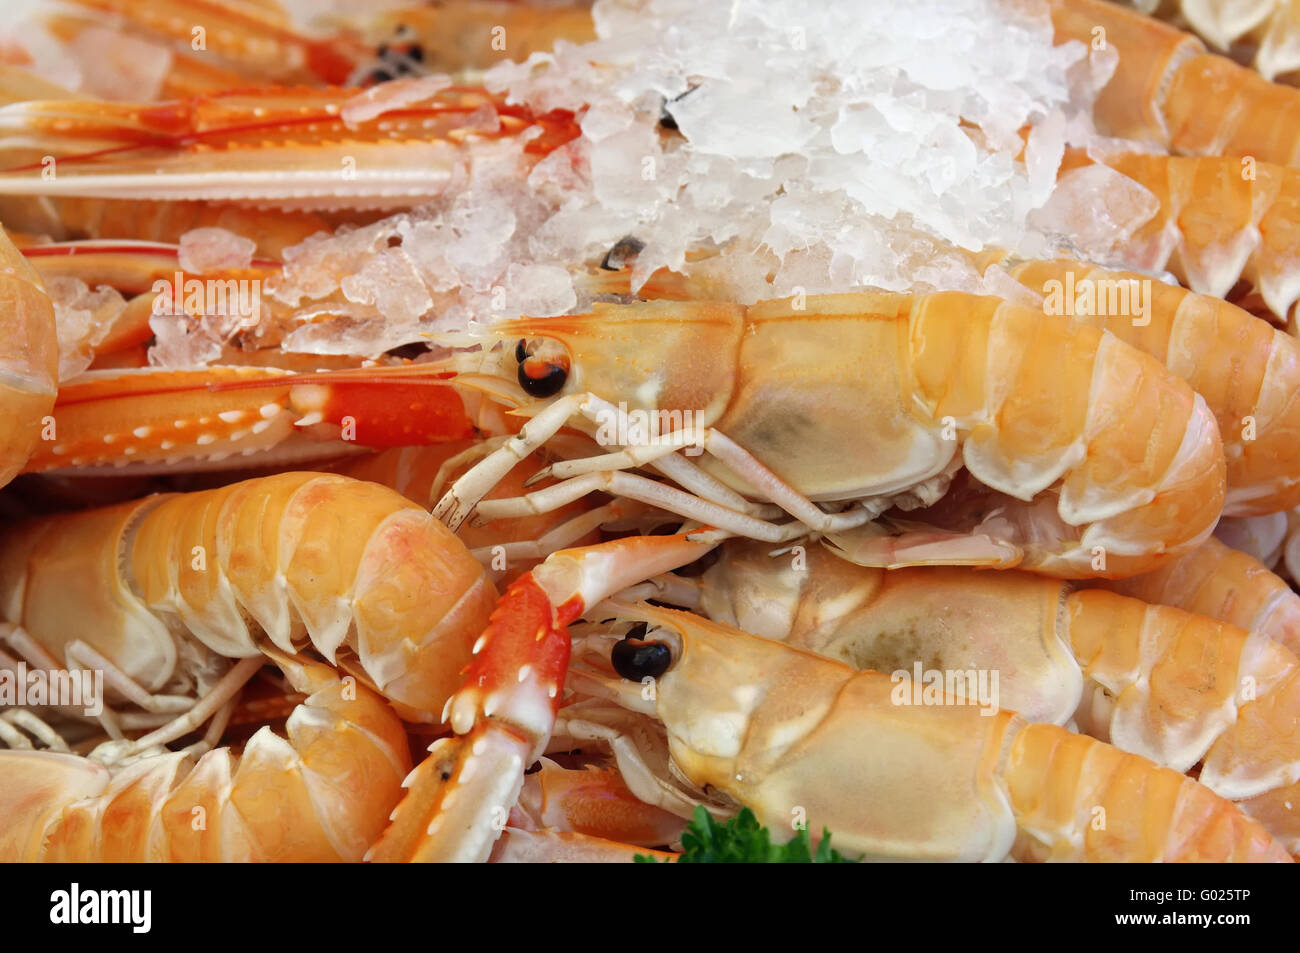 norway lobster Stock Photo